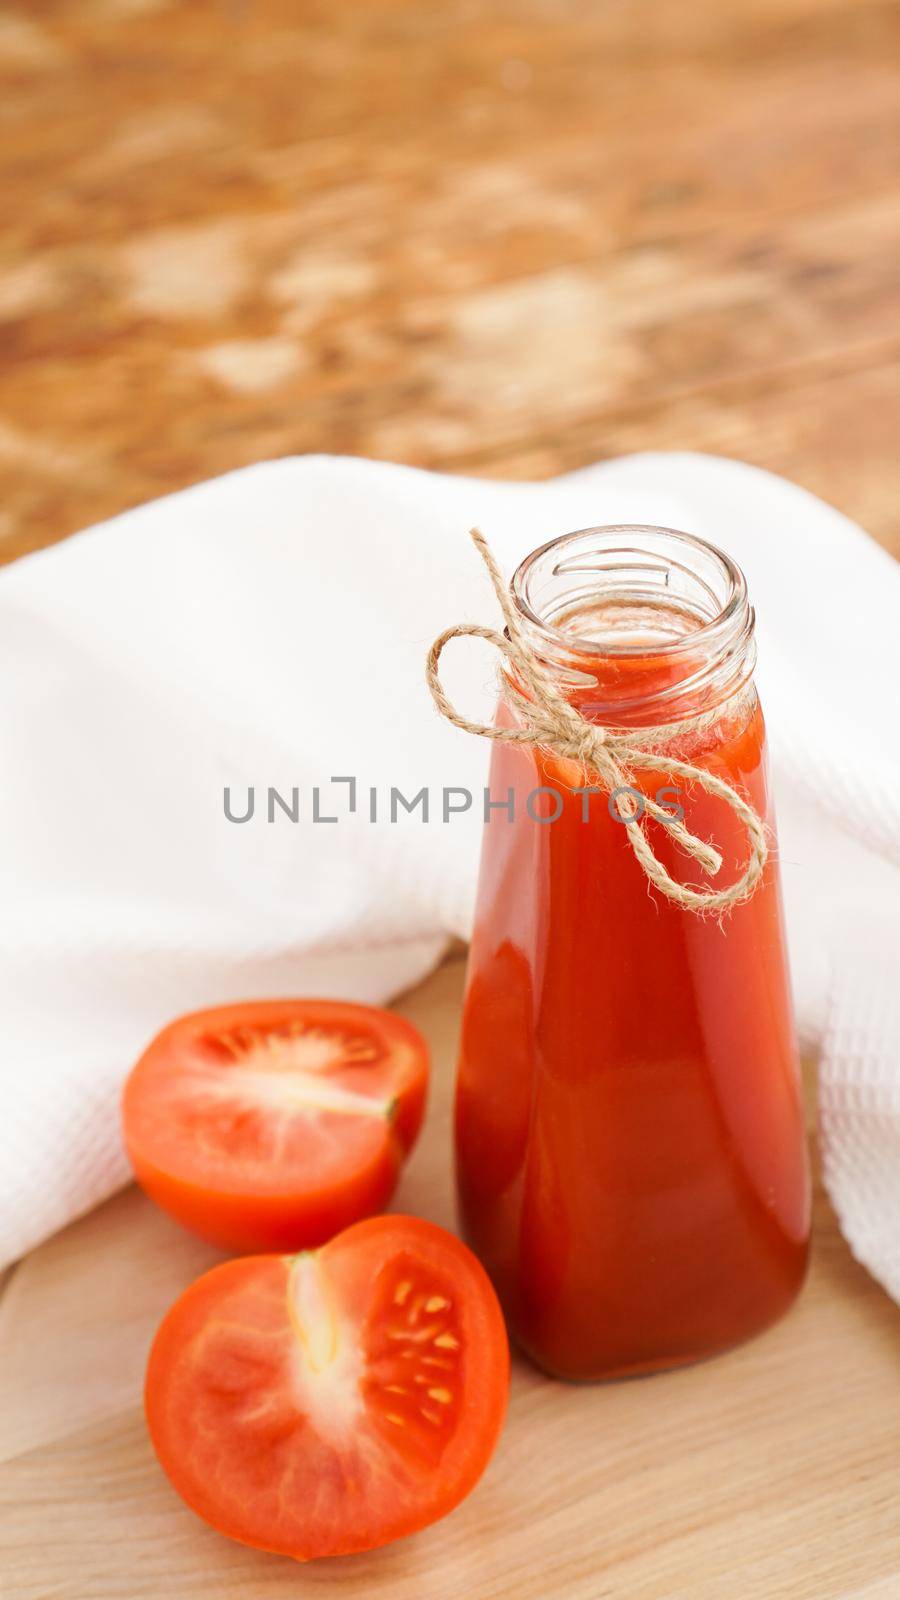 Tomato juice in glass bottle and fresh tomatoes on wooden cutting board and white towel